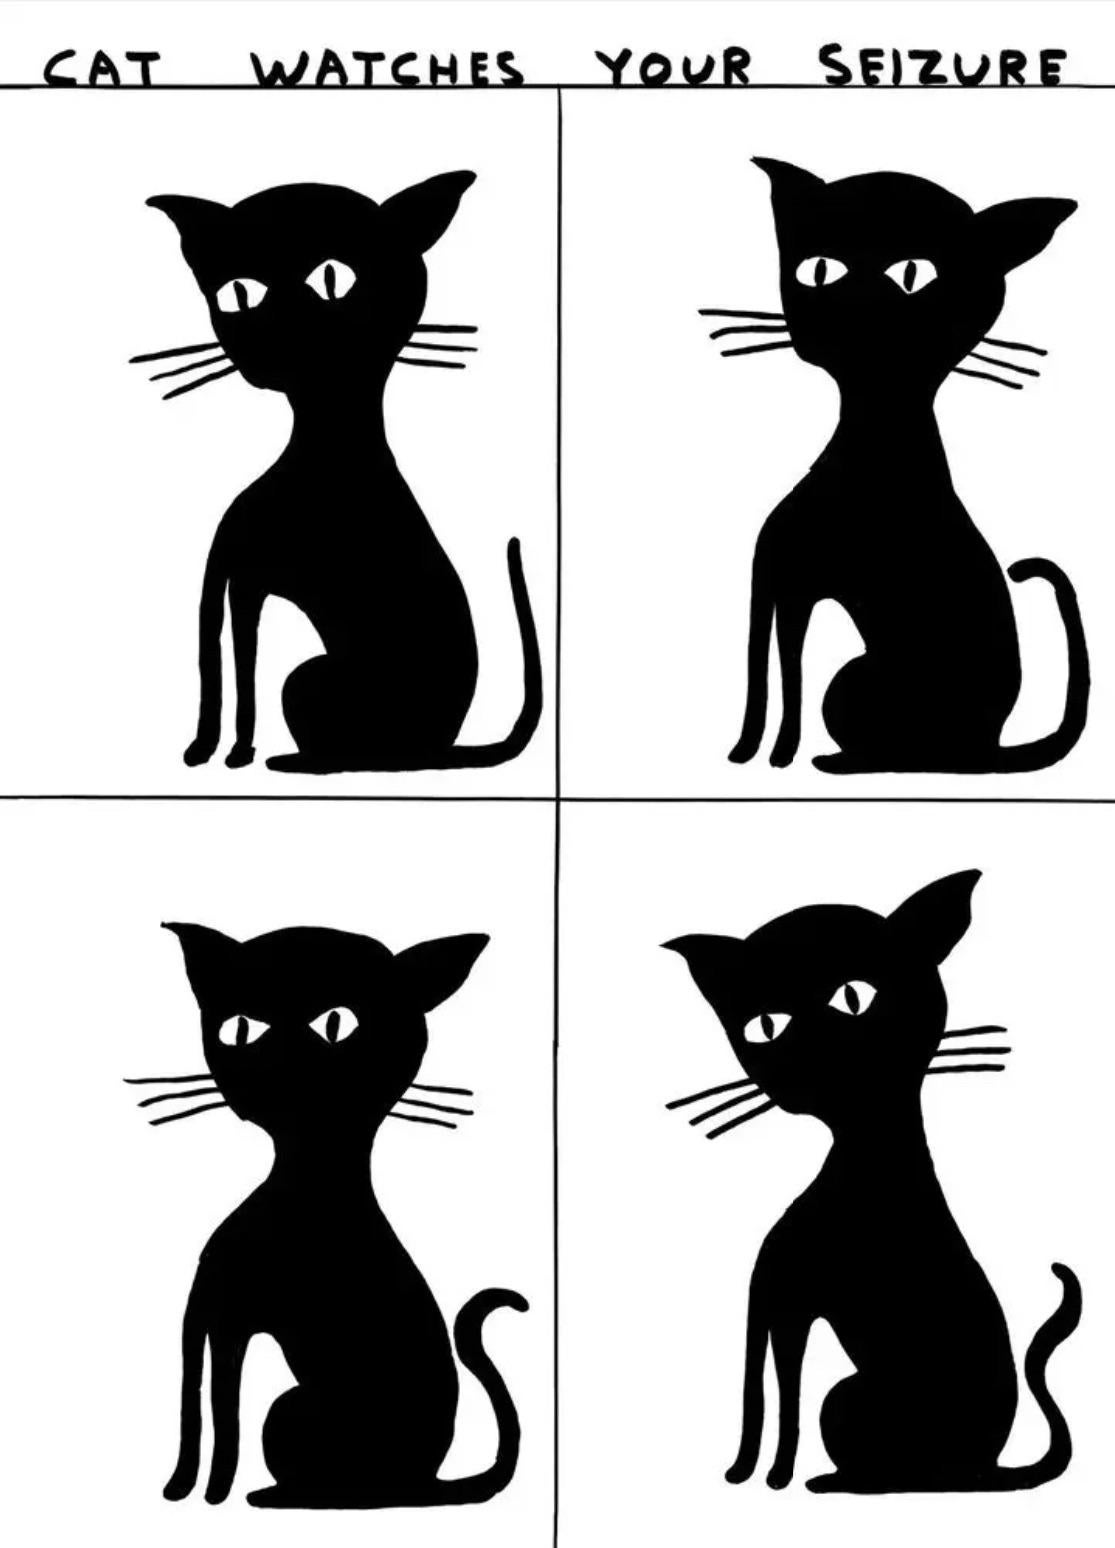 David Shrigley
Cat Watches Your Seizure, 2023
Off-set lithography Printed on 200g Munken Lynx
27 3/5 × 19 7/10 in  70 × 50 cm
Edition of 350